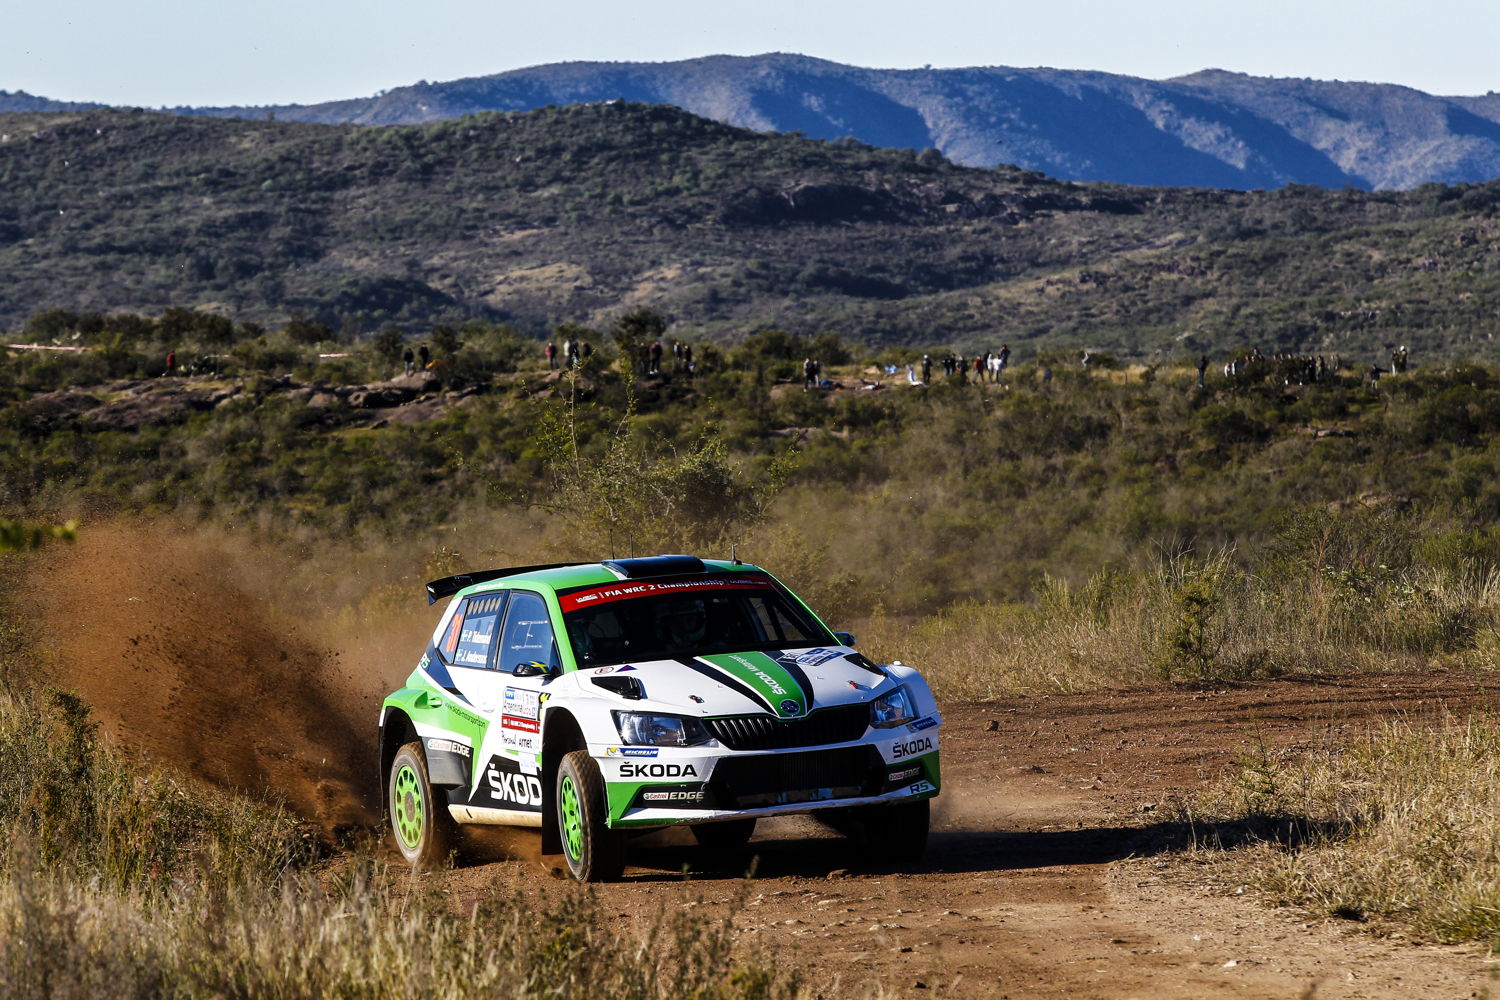 Pontus Tidemand and co-driver Jonas Andersson in the ŠKODA FABIA R5 are leading the World Rally Championship (WRC 2).